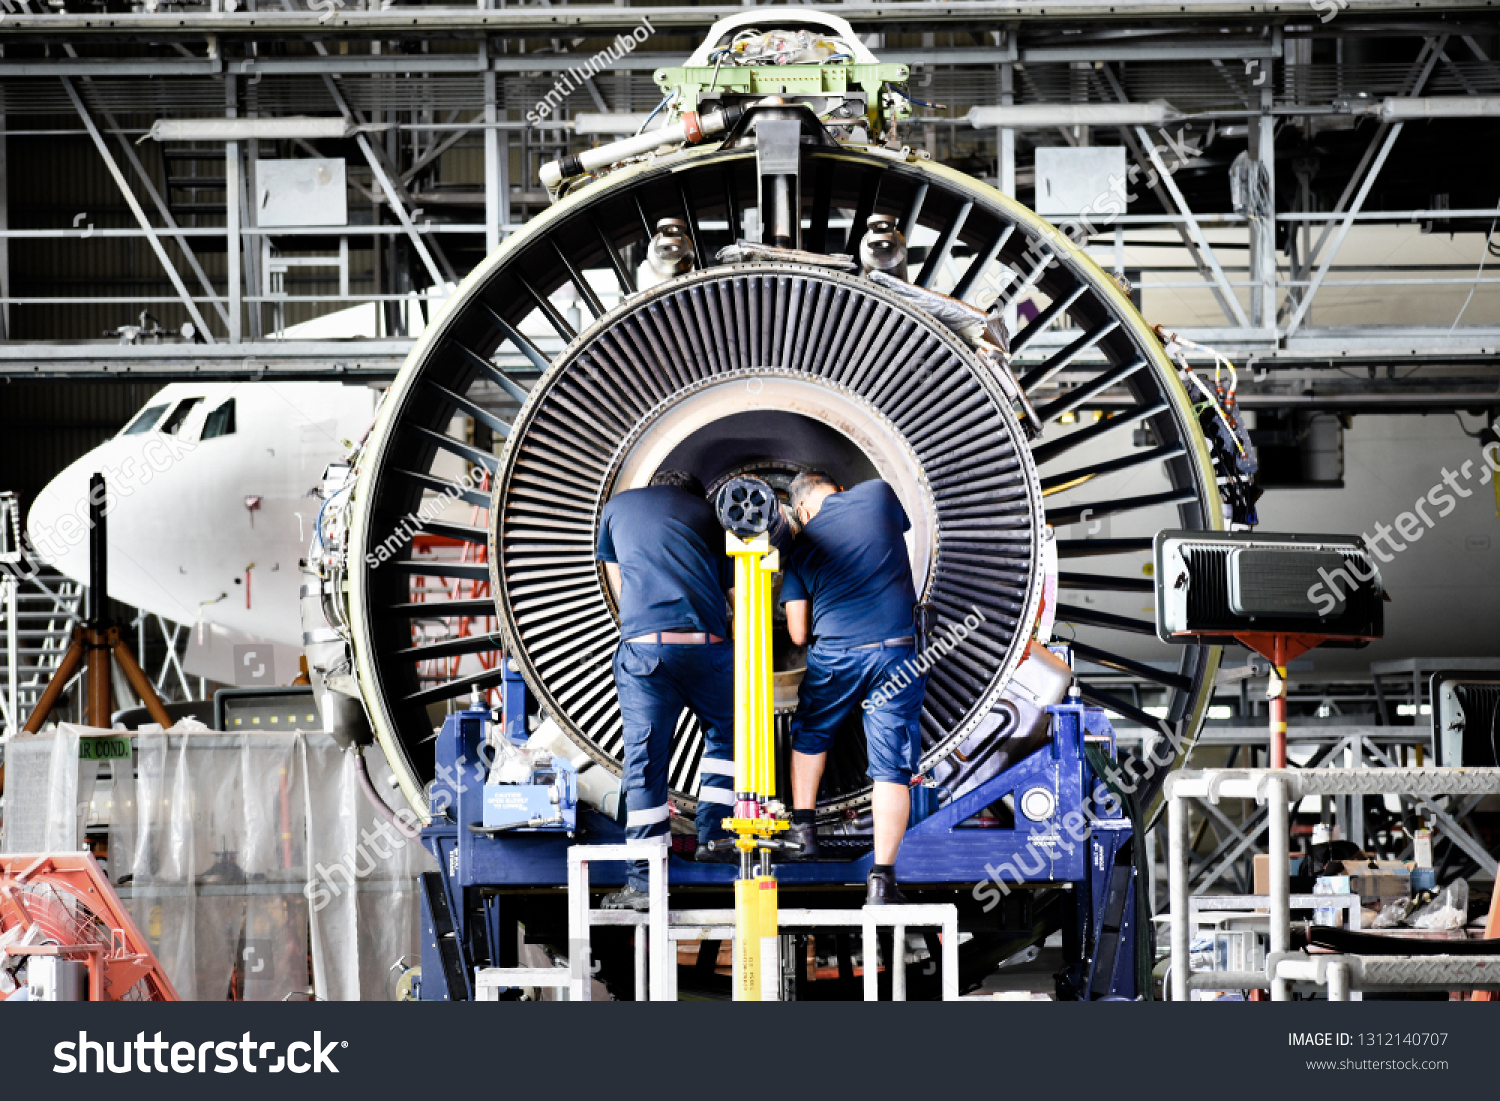 Jet engine remove from aircraft (airplane) for maintenance at aircraft hangar.Jet engine maintenance and change part by aircraft technician . #1312140707